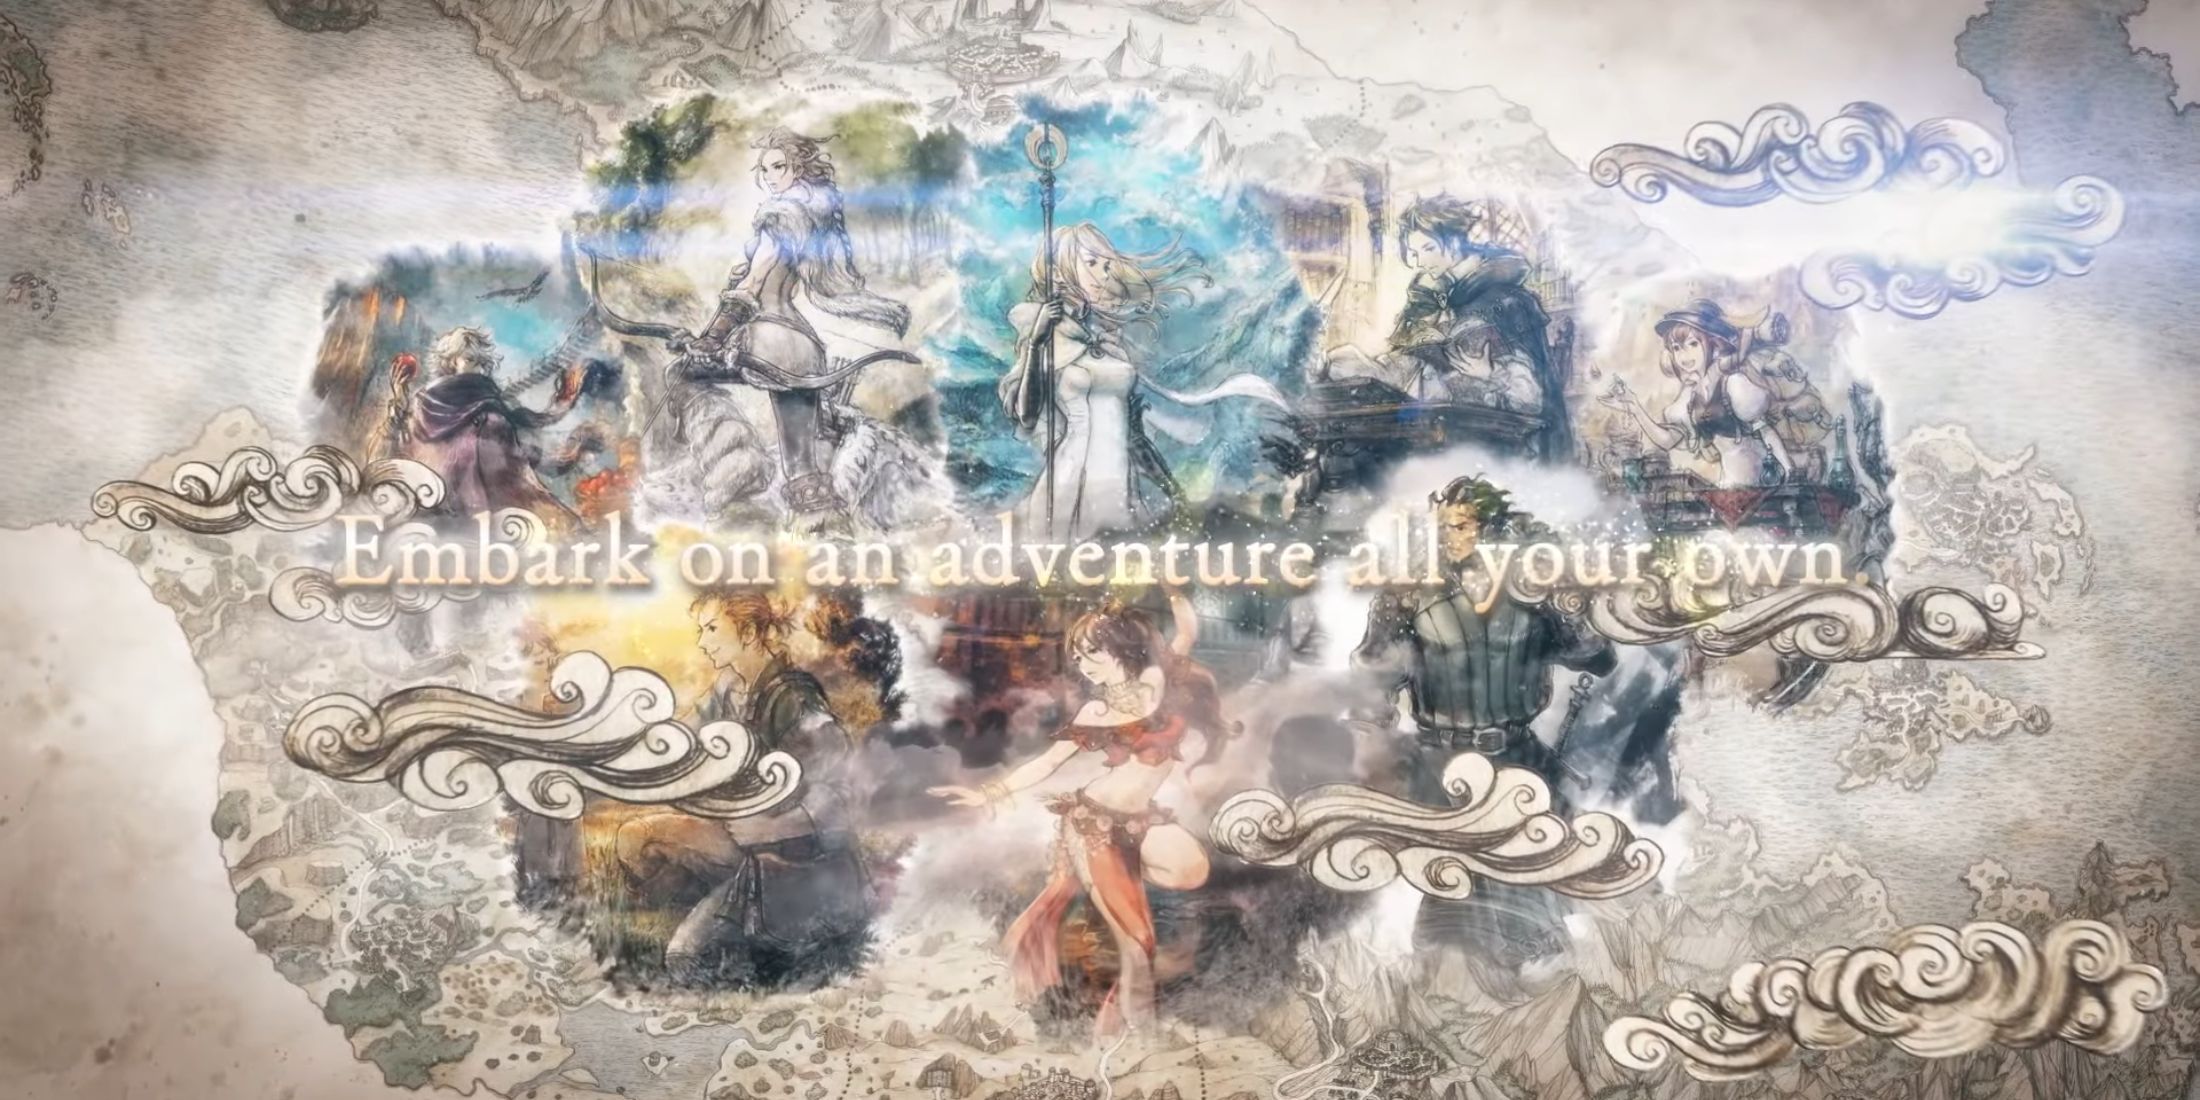 Octopath Traveler characters in the background to a text that says 